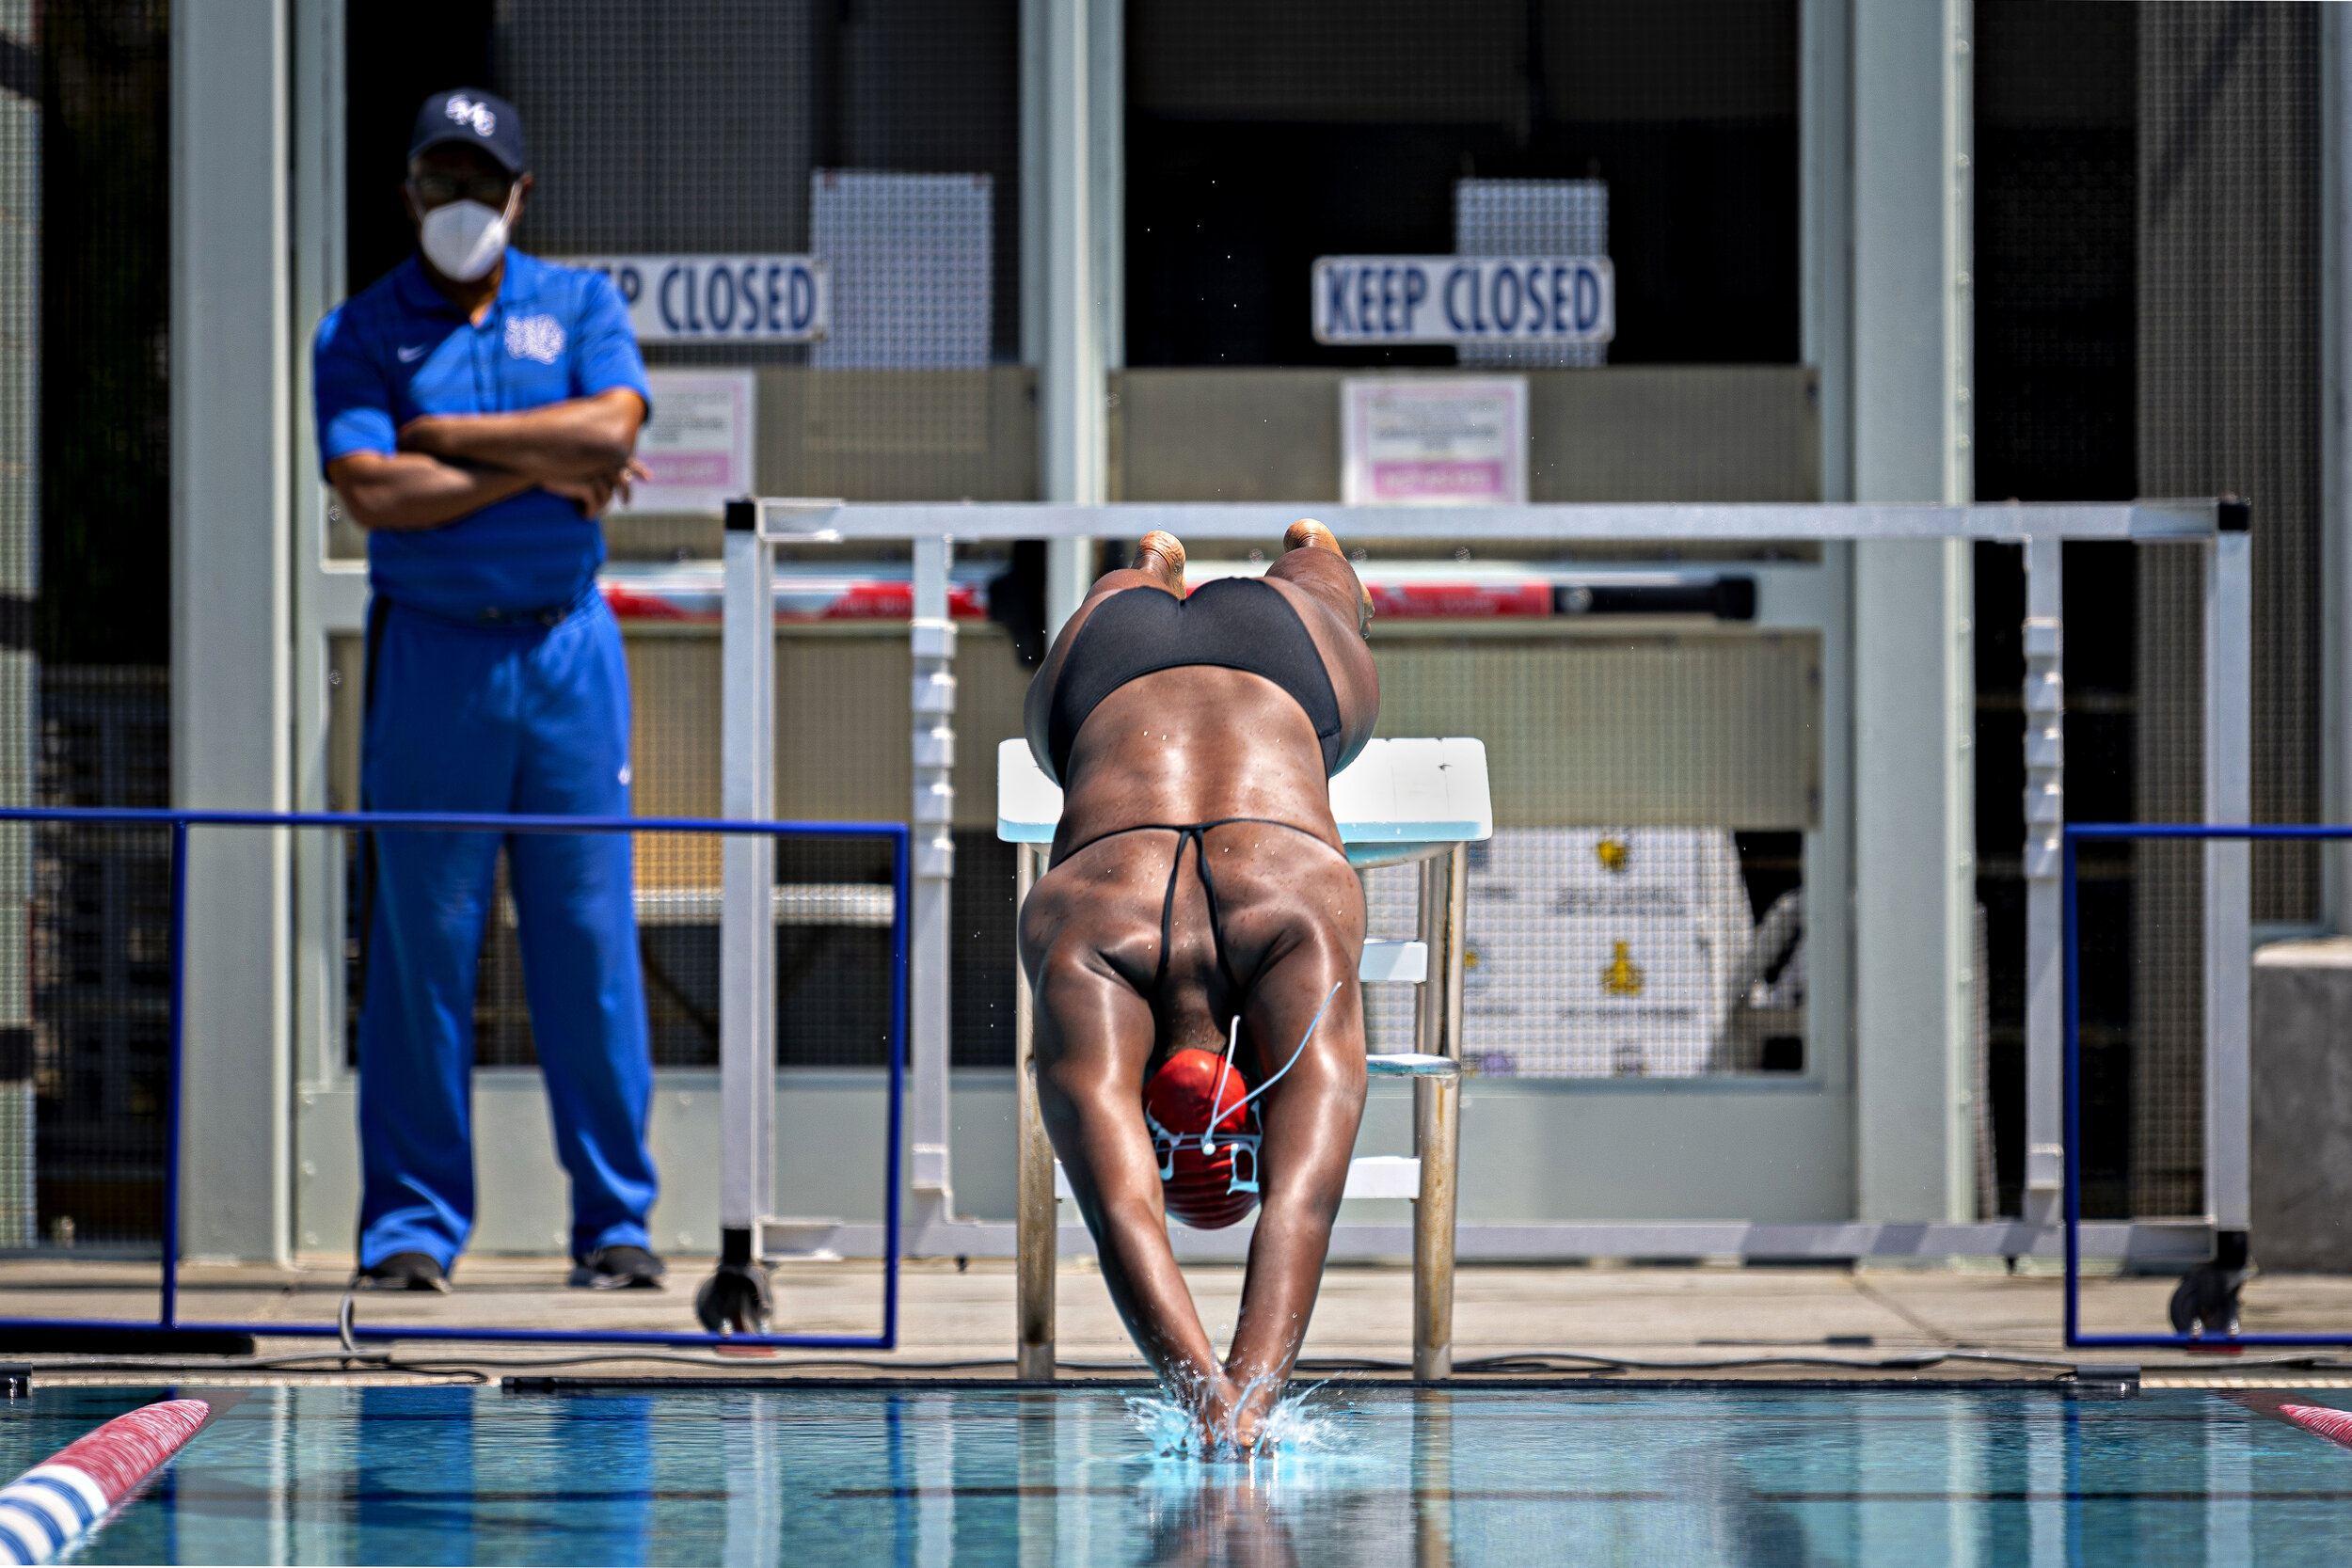  A member of the Bakersfield Women's Swim team breaks the surface of the water in a meet with Santa Monica College on April 16, 2021, in Santa Monica Calif. After being forced to shutdown for nearly a year from the COVID-19 pandemic, the sports progr